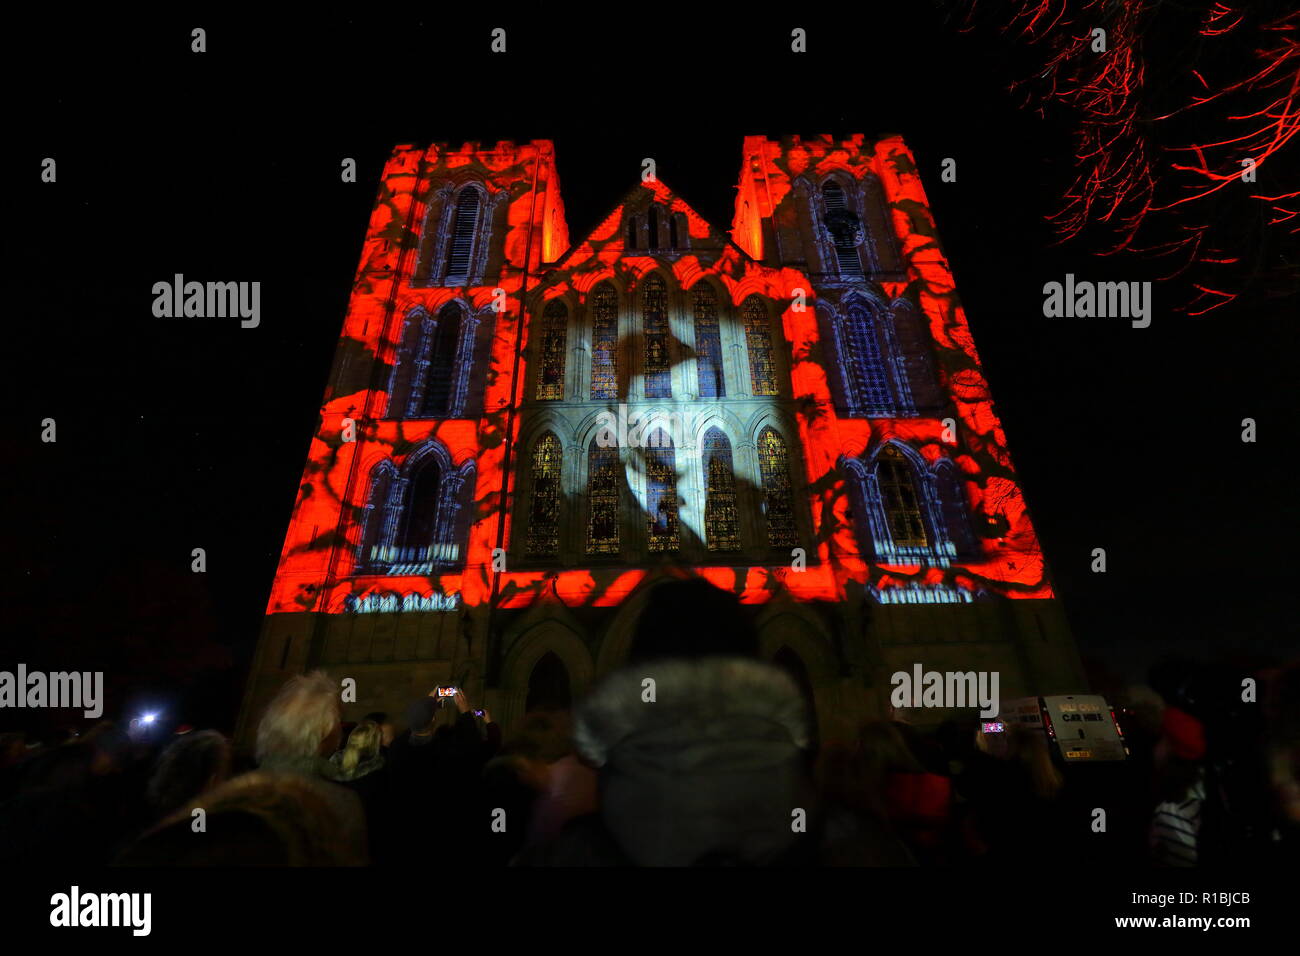 Ripon,North Yorkshire,UK. 10th November 2018. Ripon Cathedral puts on an illuminated projection display to mark armistice day 2018. The display shows still images from the war along with names of some of those who lost their lives. Animated poppies also cascade down the face of the cathedral where 1000's gathered to watch the final showing. Credit: Yorkshire Pics/Alamy Live News Stock Photo